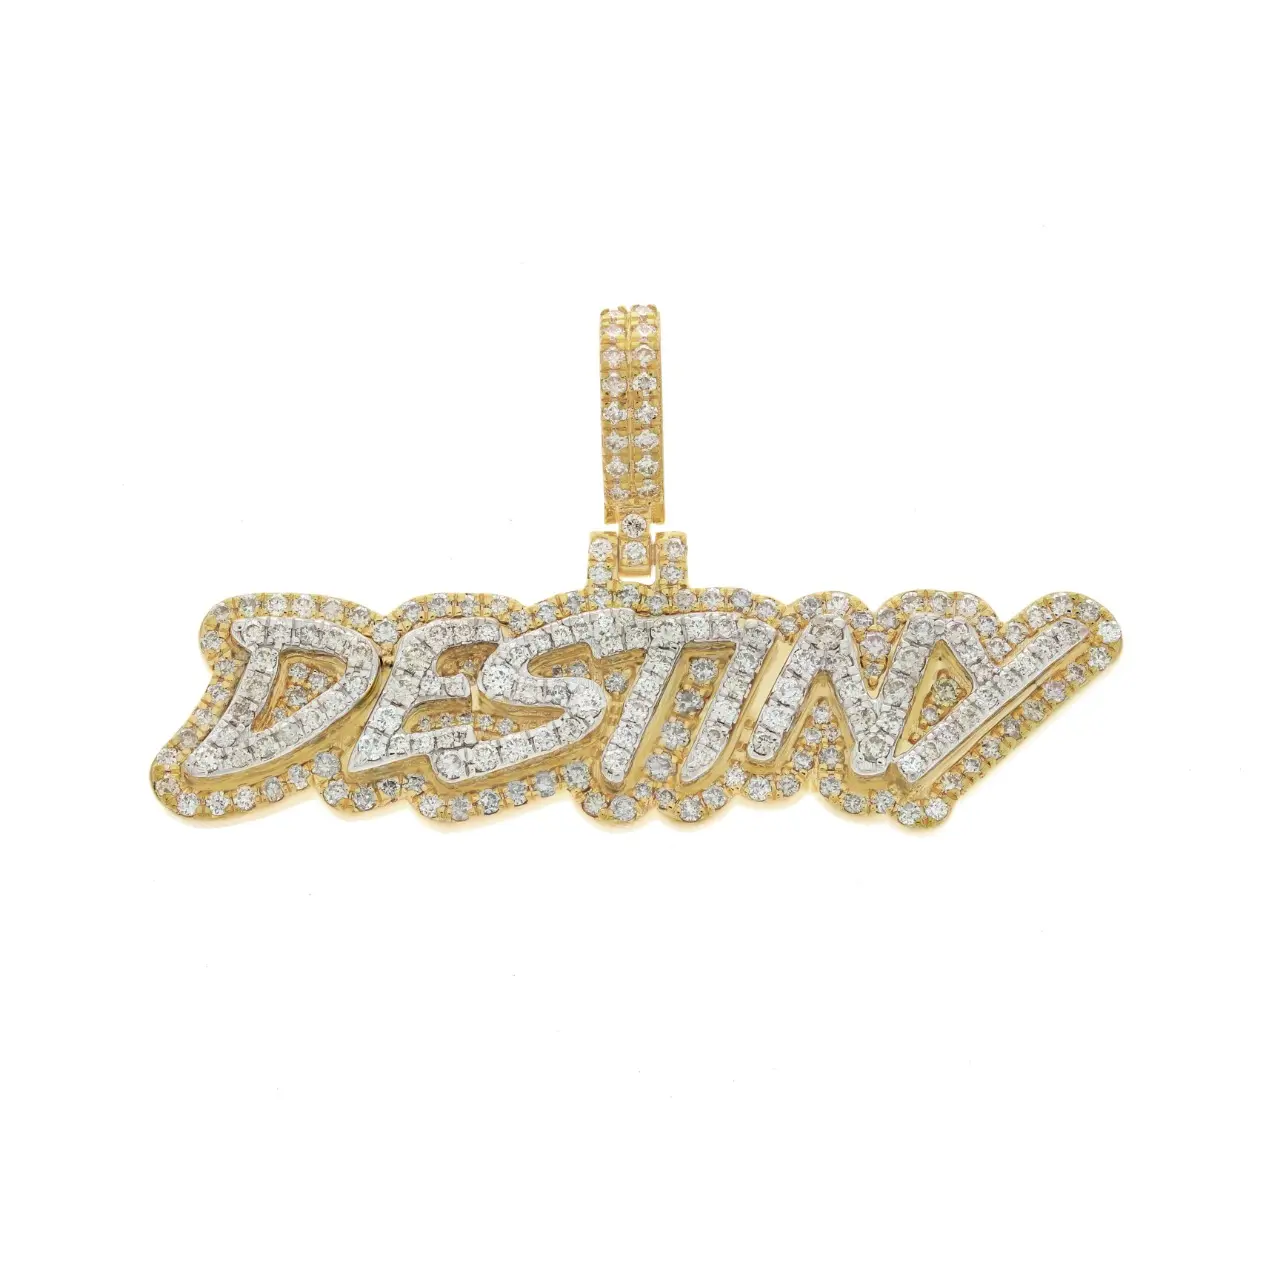 Custom trendy Name pendant with 10k White gold and VS natural diamonds-13 grams gold weight and 2.05 carat weight custom hip hop